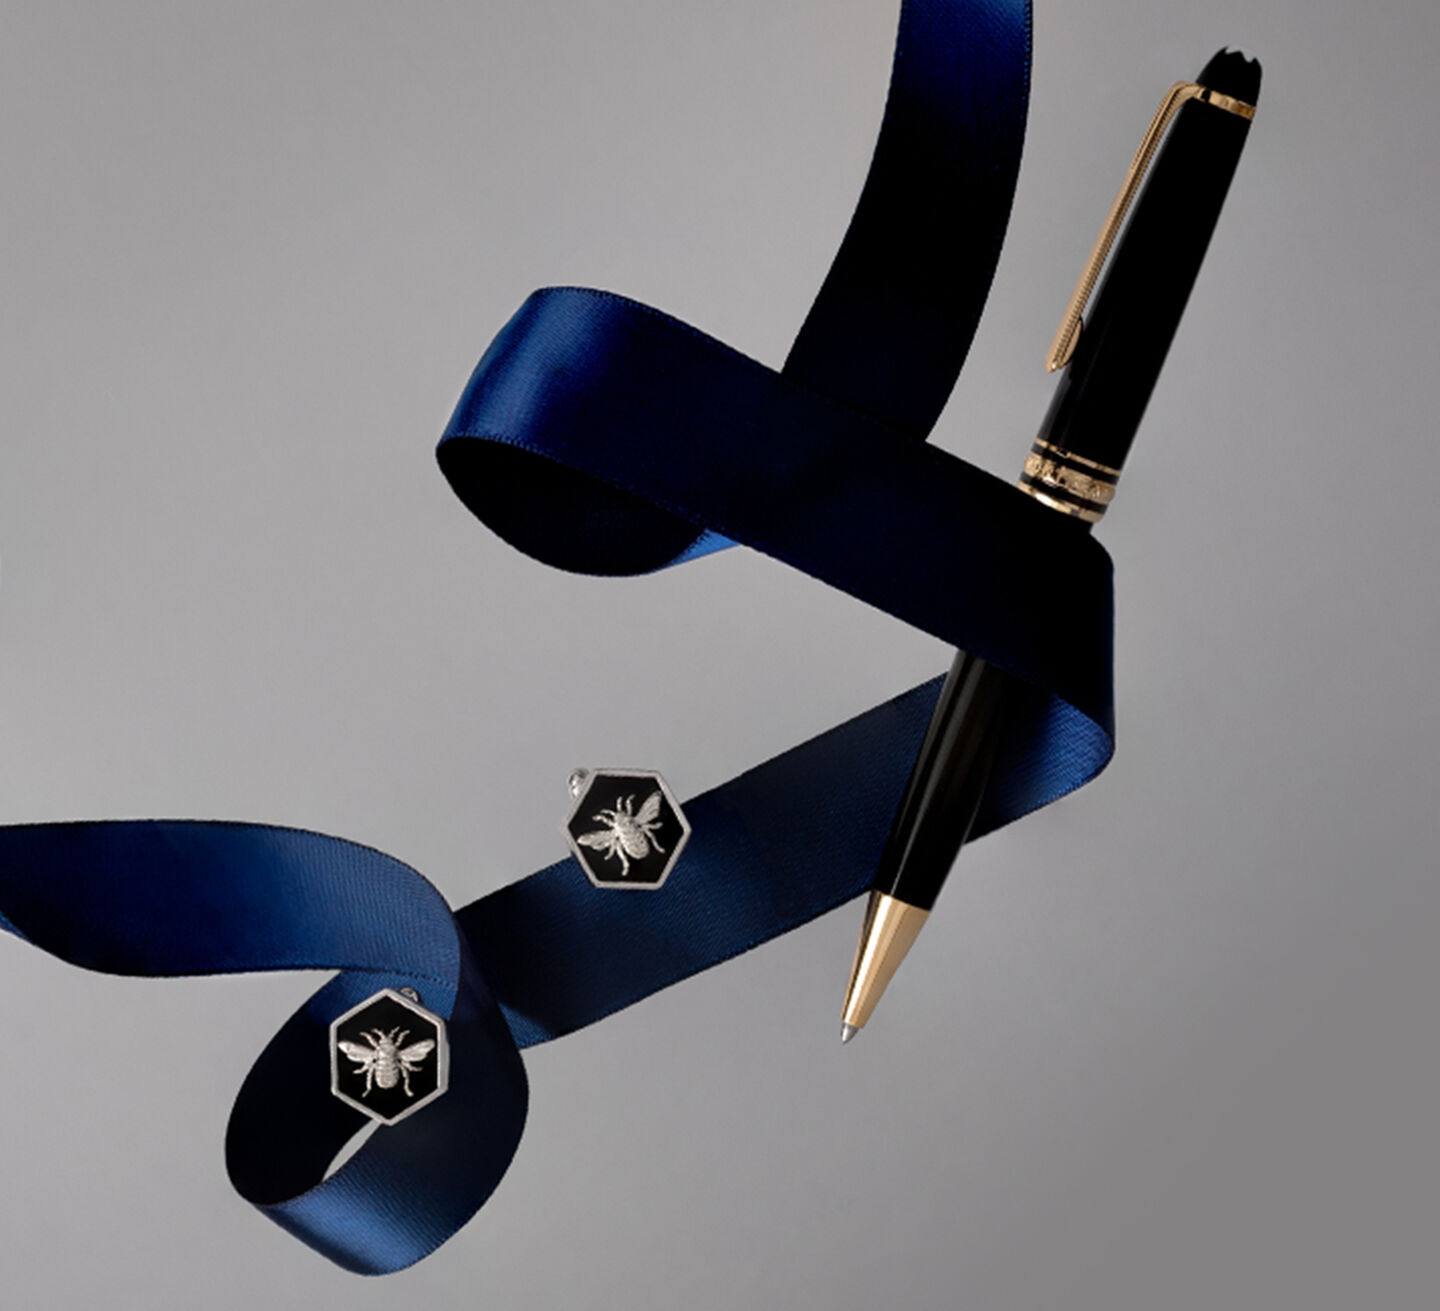 A black and gold pen beside a pair of black cuff links with a silver bee